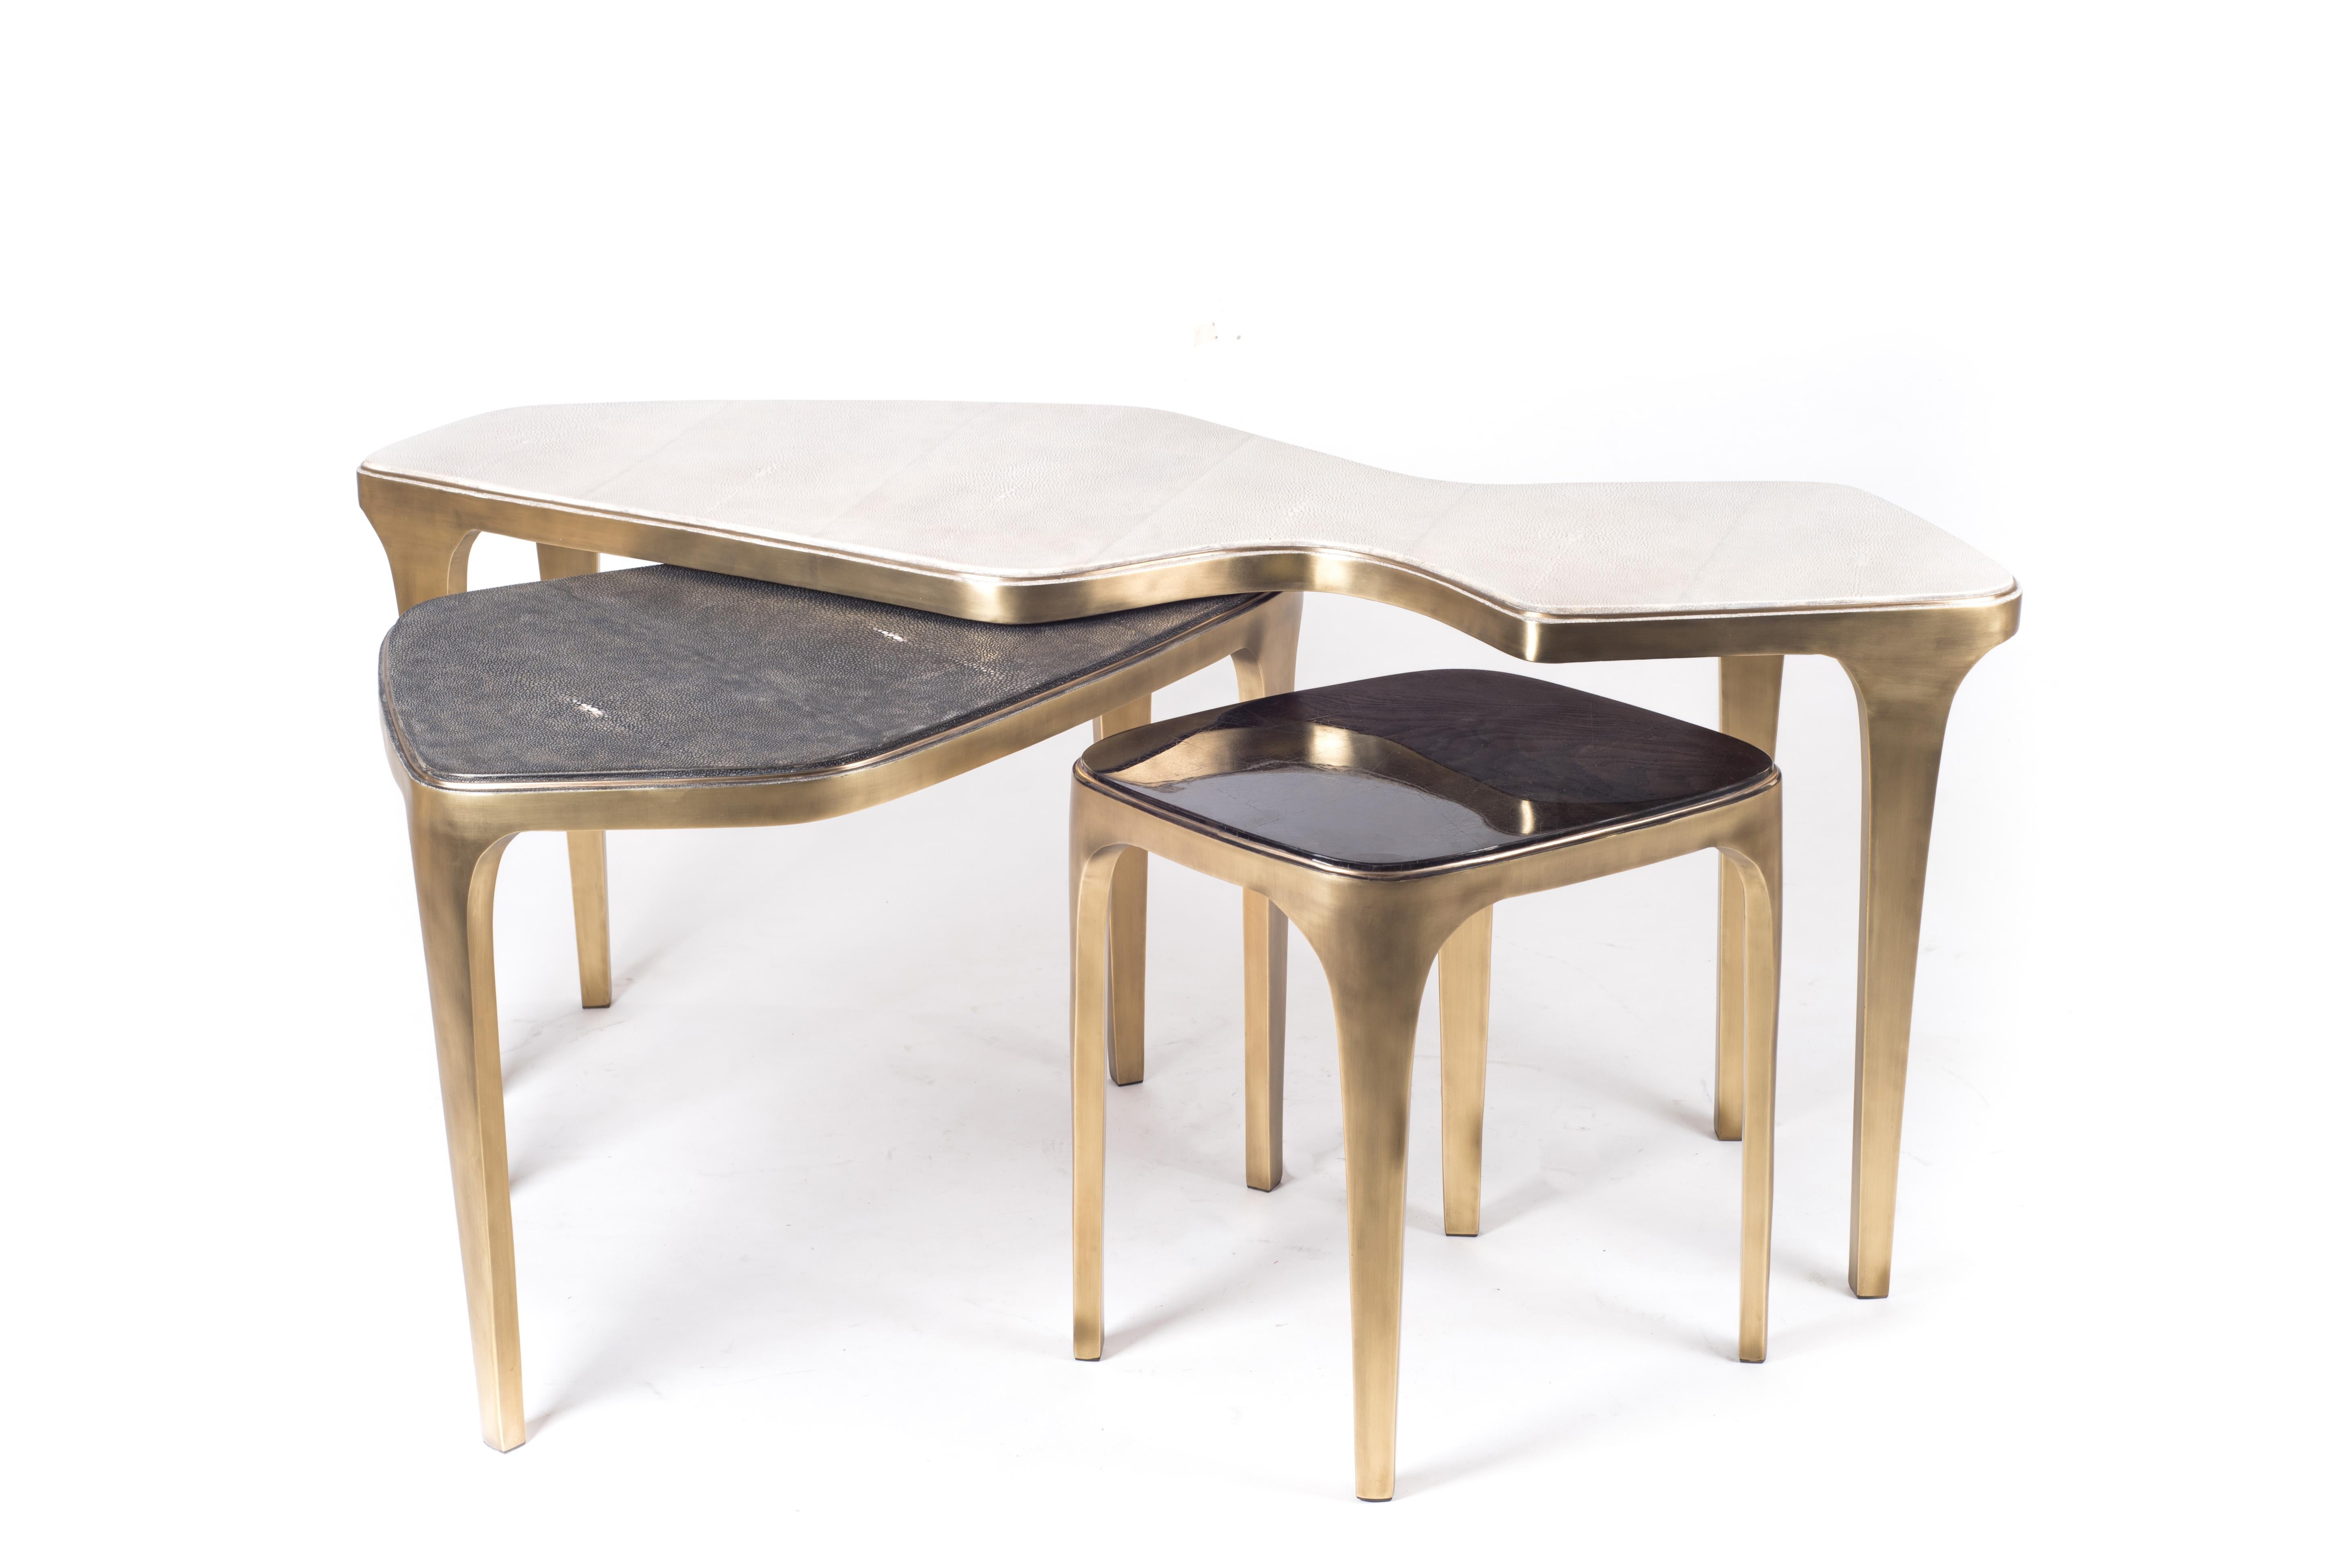 The Cosmos nesting coffee table small is both Minimalist and dramatic. The top is inlaid in black pen shell, that is hand-selected by artisans, and completed with bronze-patina brass. With its beautiful amorphous shape this piece adds a statement to